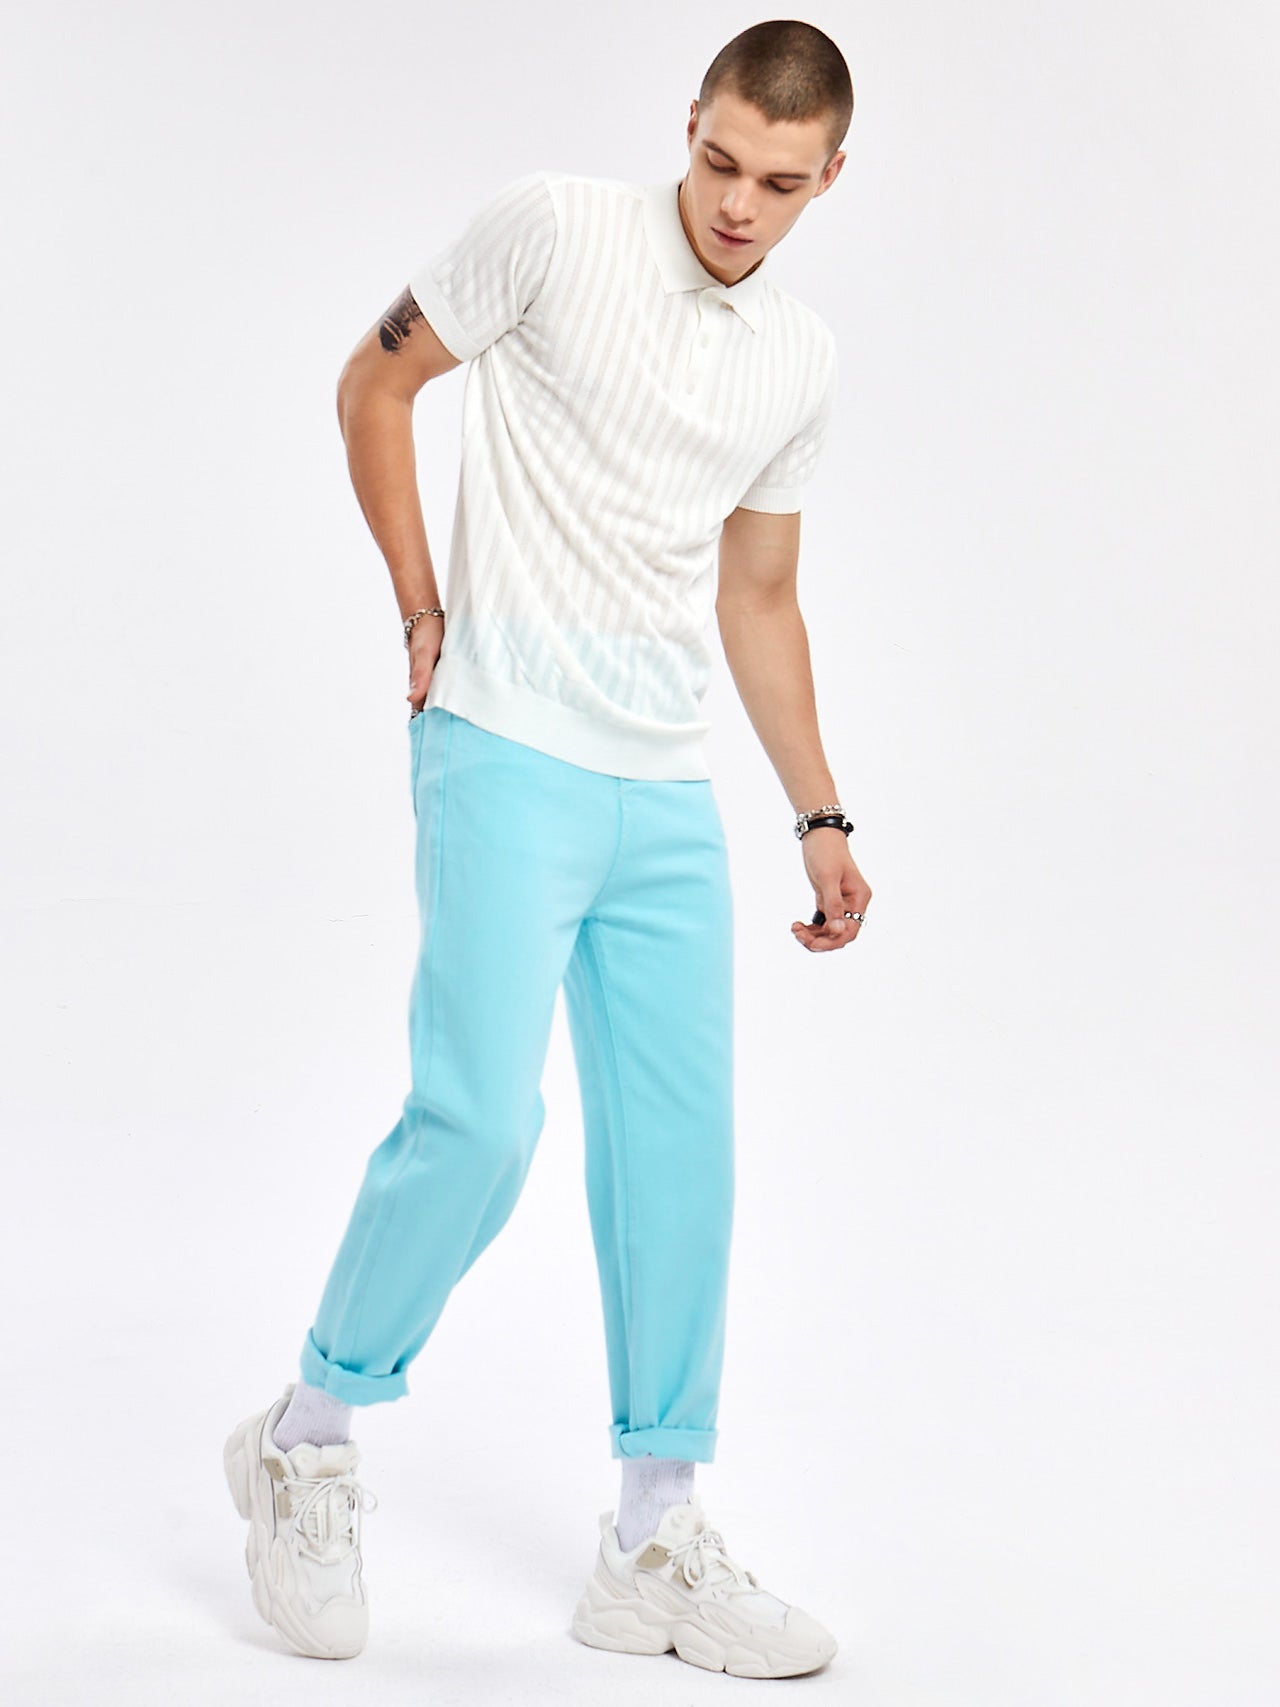 JUSTNOTAG Casual Plain Knitted White Polo Tops